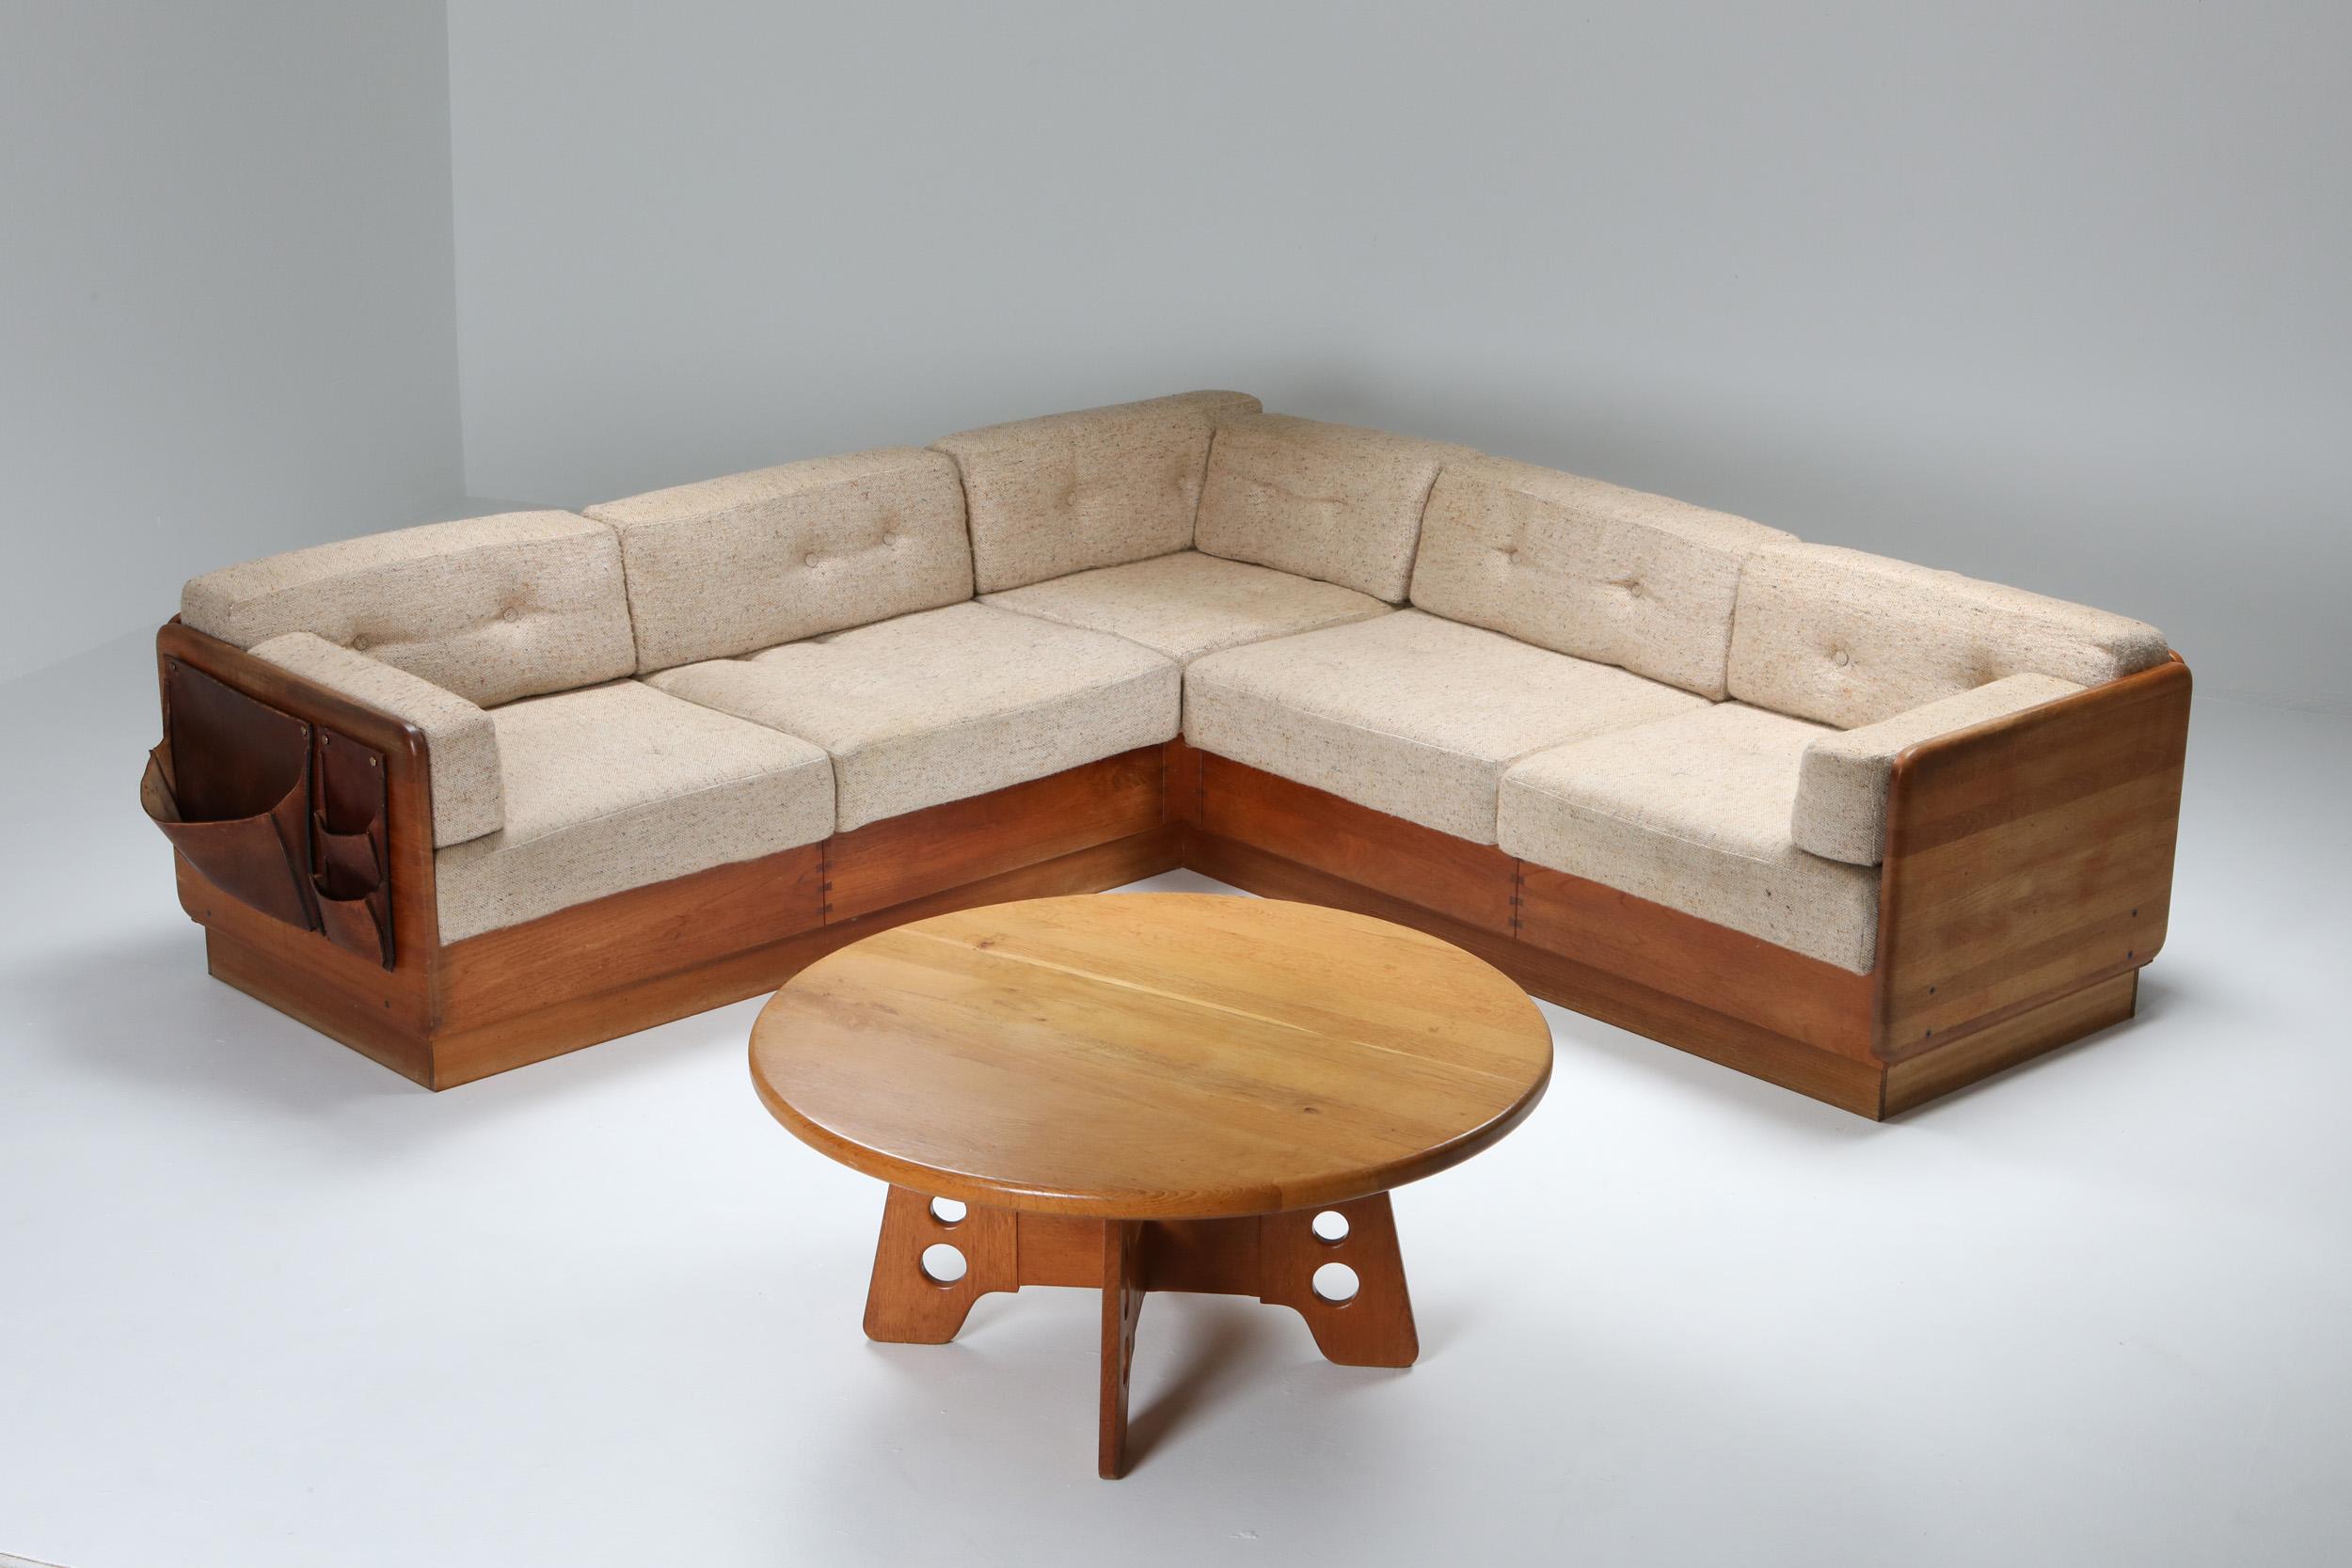 Scandinavian Modern Mid-Century Modern Sectional Couch by Mikael Laursen